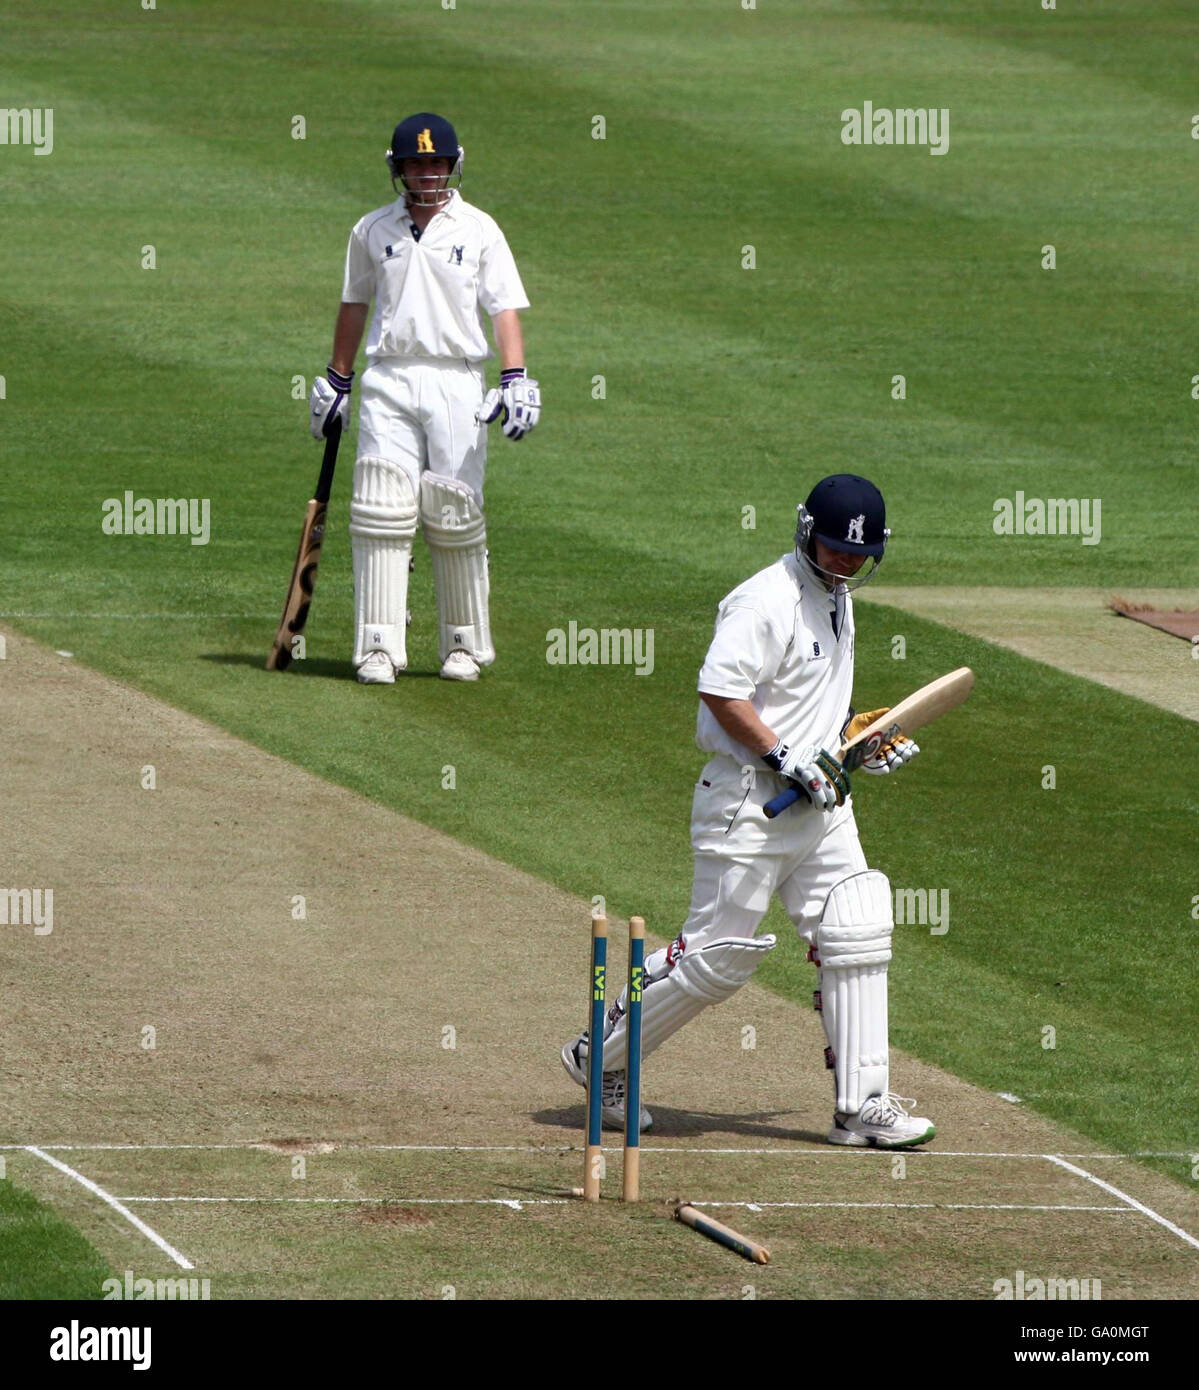 Warwickshire's Darren Maddy looks back at his wicket after he was cleaned bowled by Worcestershire's Doug Bollinger during the Liverpool Victoria County Championship Division One match at The County Ground, Edgbaston, Birmingham. Stock Photo